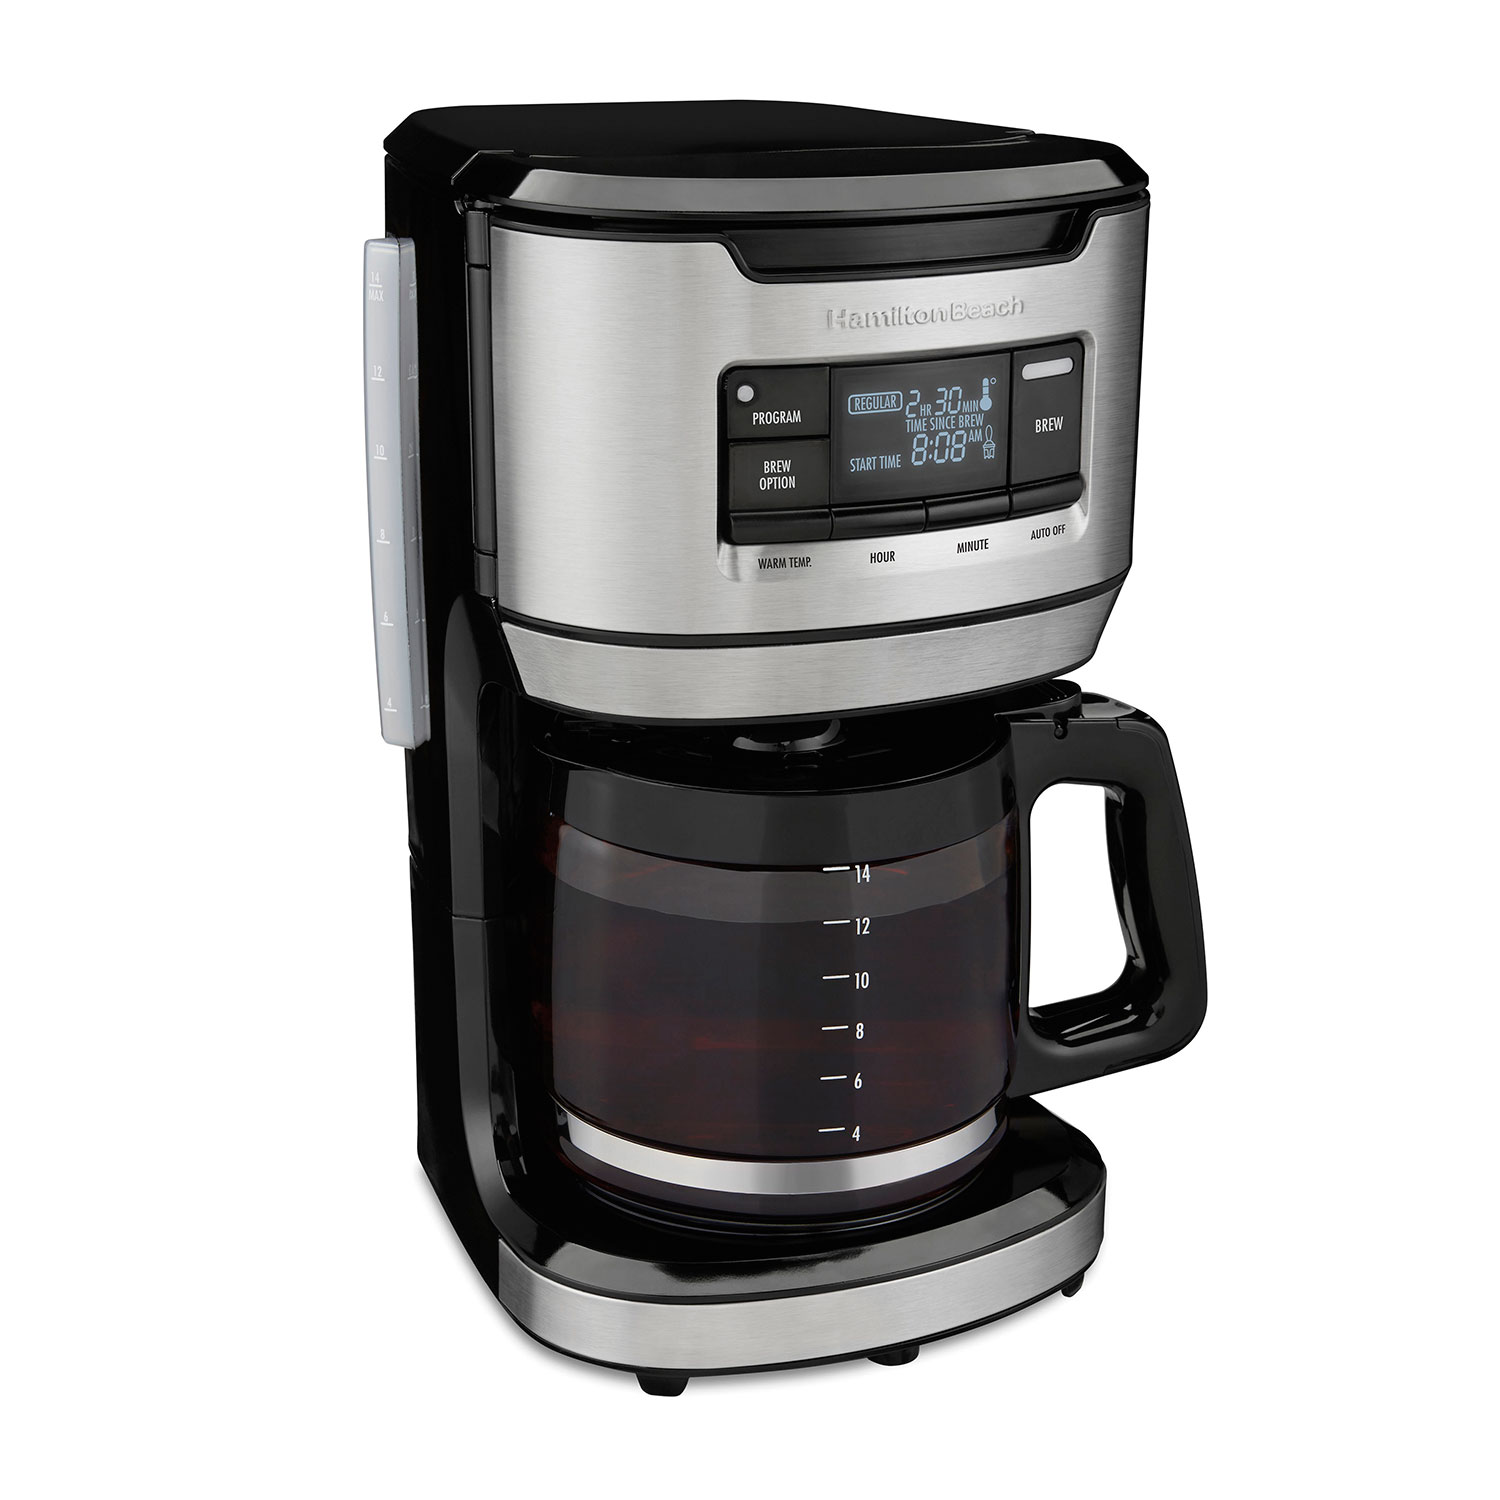 FrontFill® 14 Cup Programmable Coffee Maker (46390)